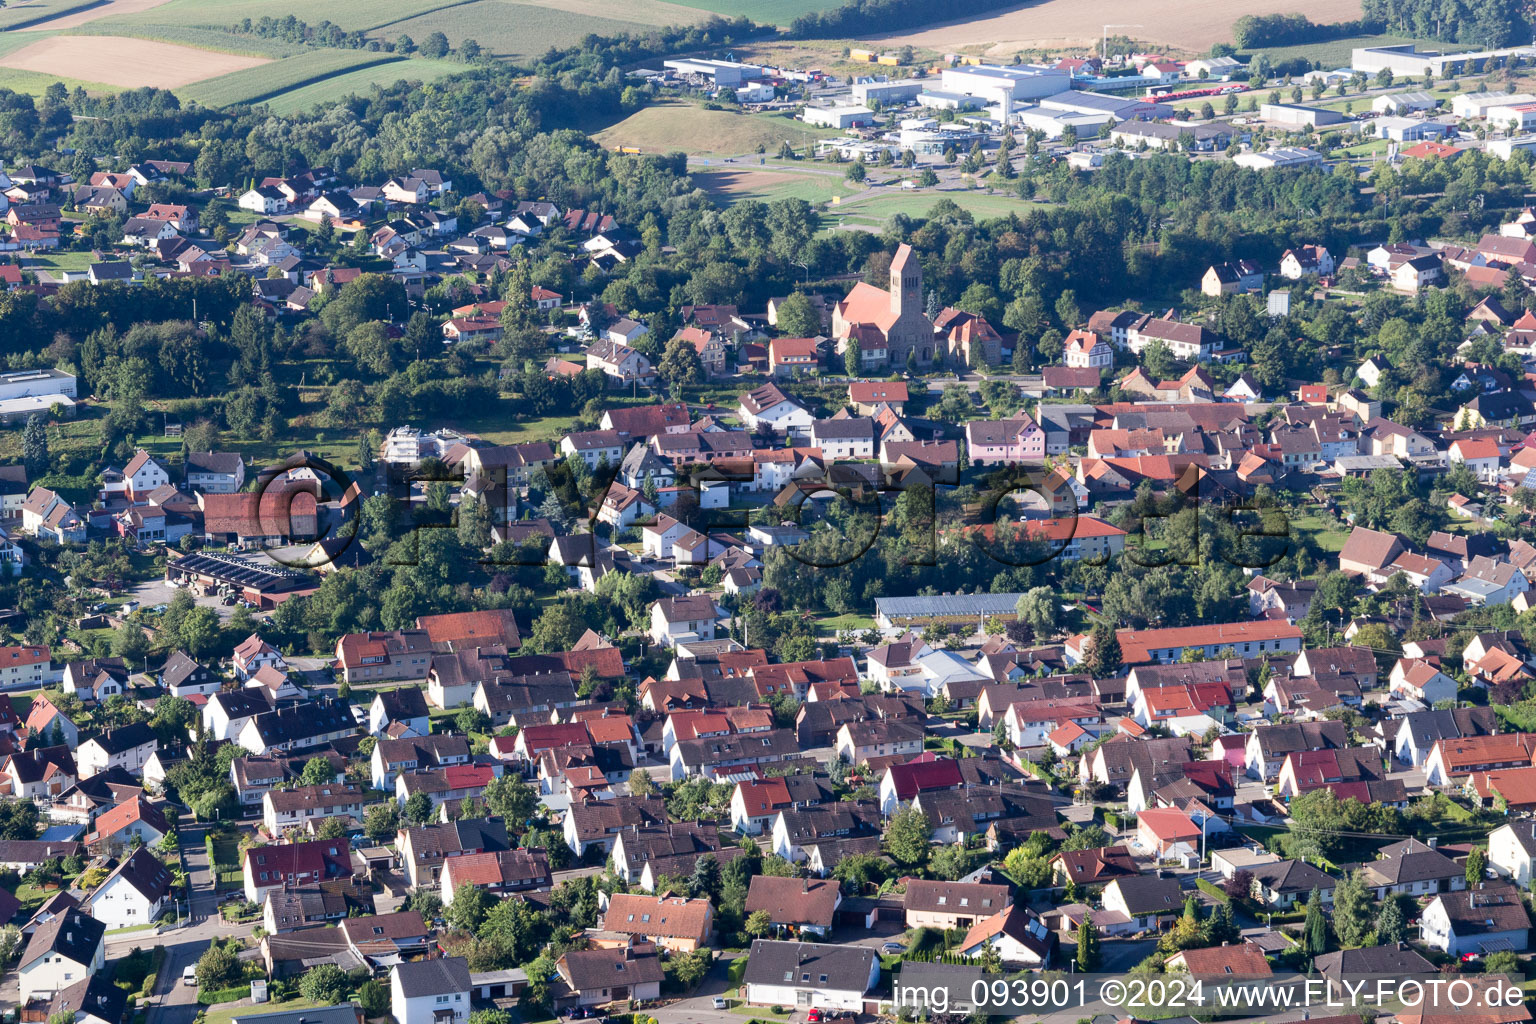 Aerial view of Village - view on the edge of agricultural fields and farmland in the district Flehingen in Oberderdingen in the state Baden-Wurttemberg, Germany